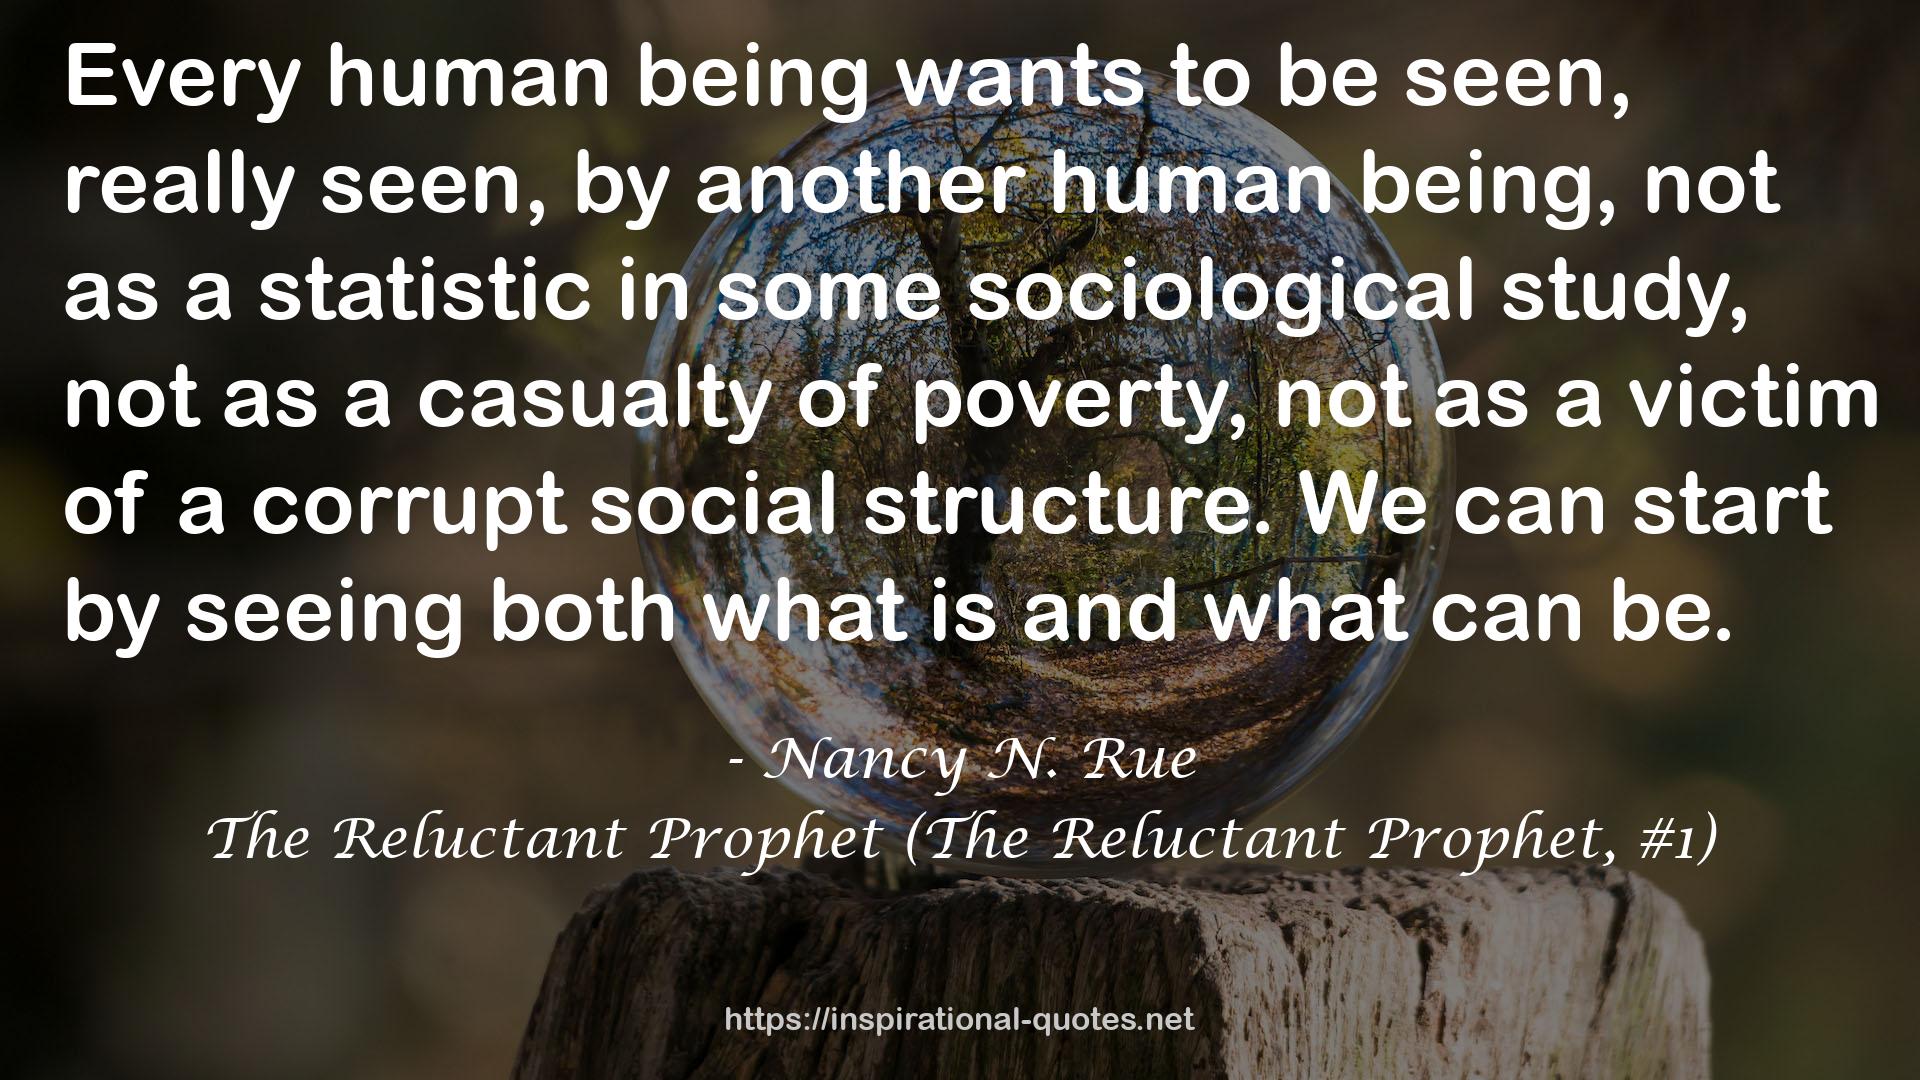 The Reluctant Prophet (The Reluctant Prophet, #1) QUOTES